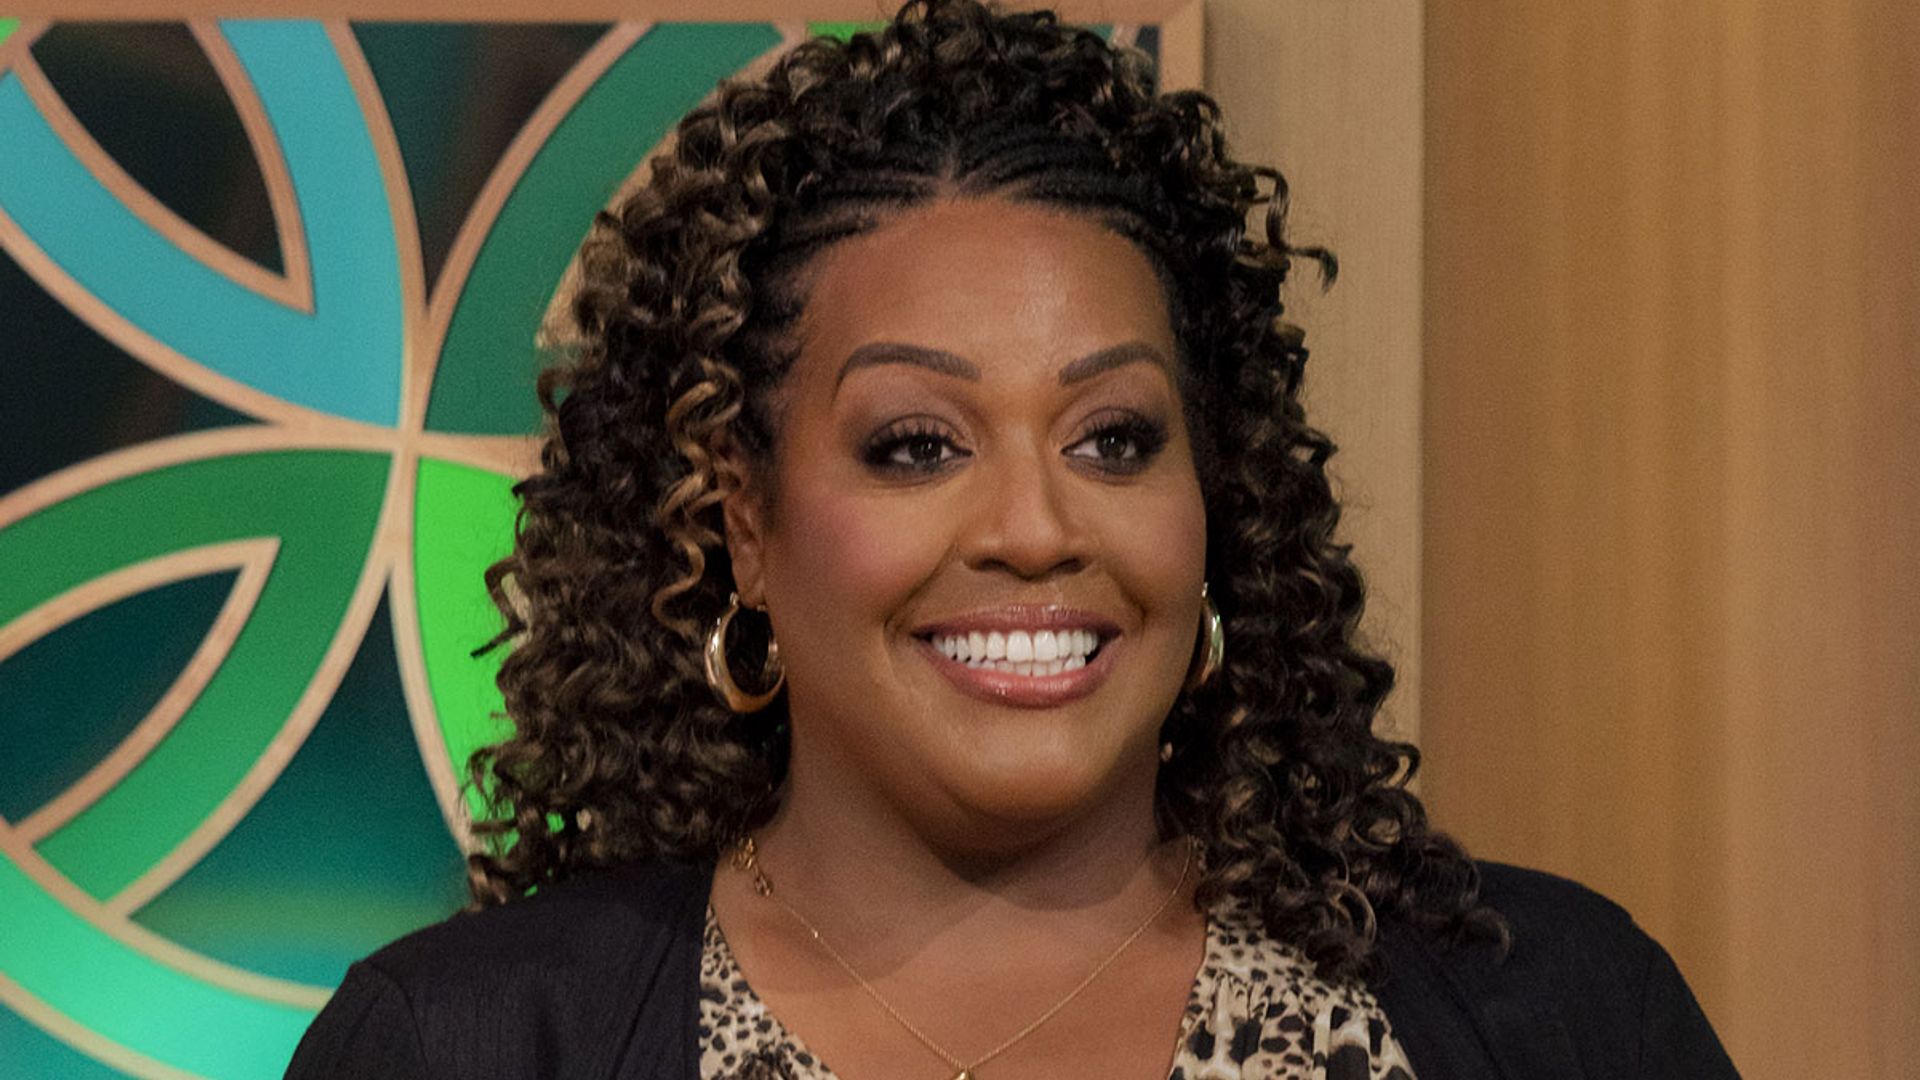 Alison Hammond turns heads in must-see emerald green co-ord